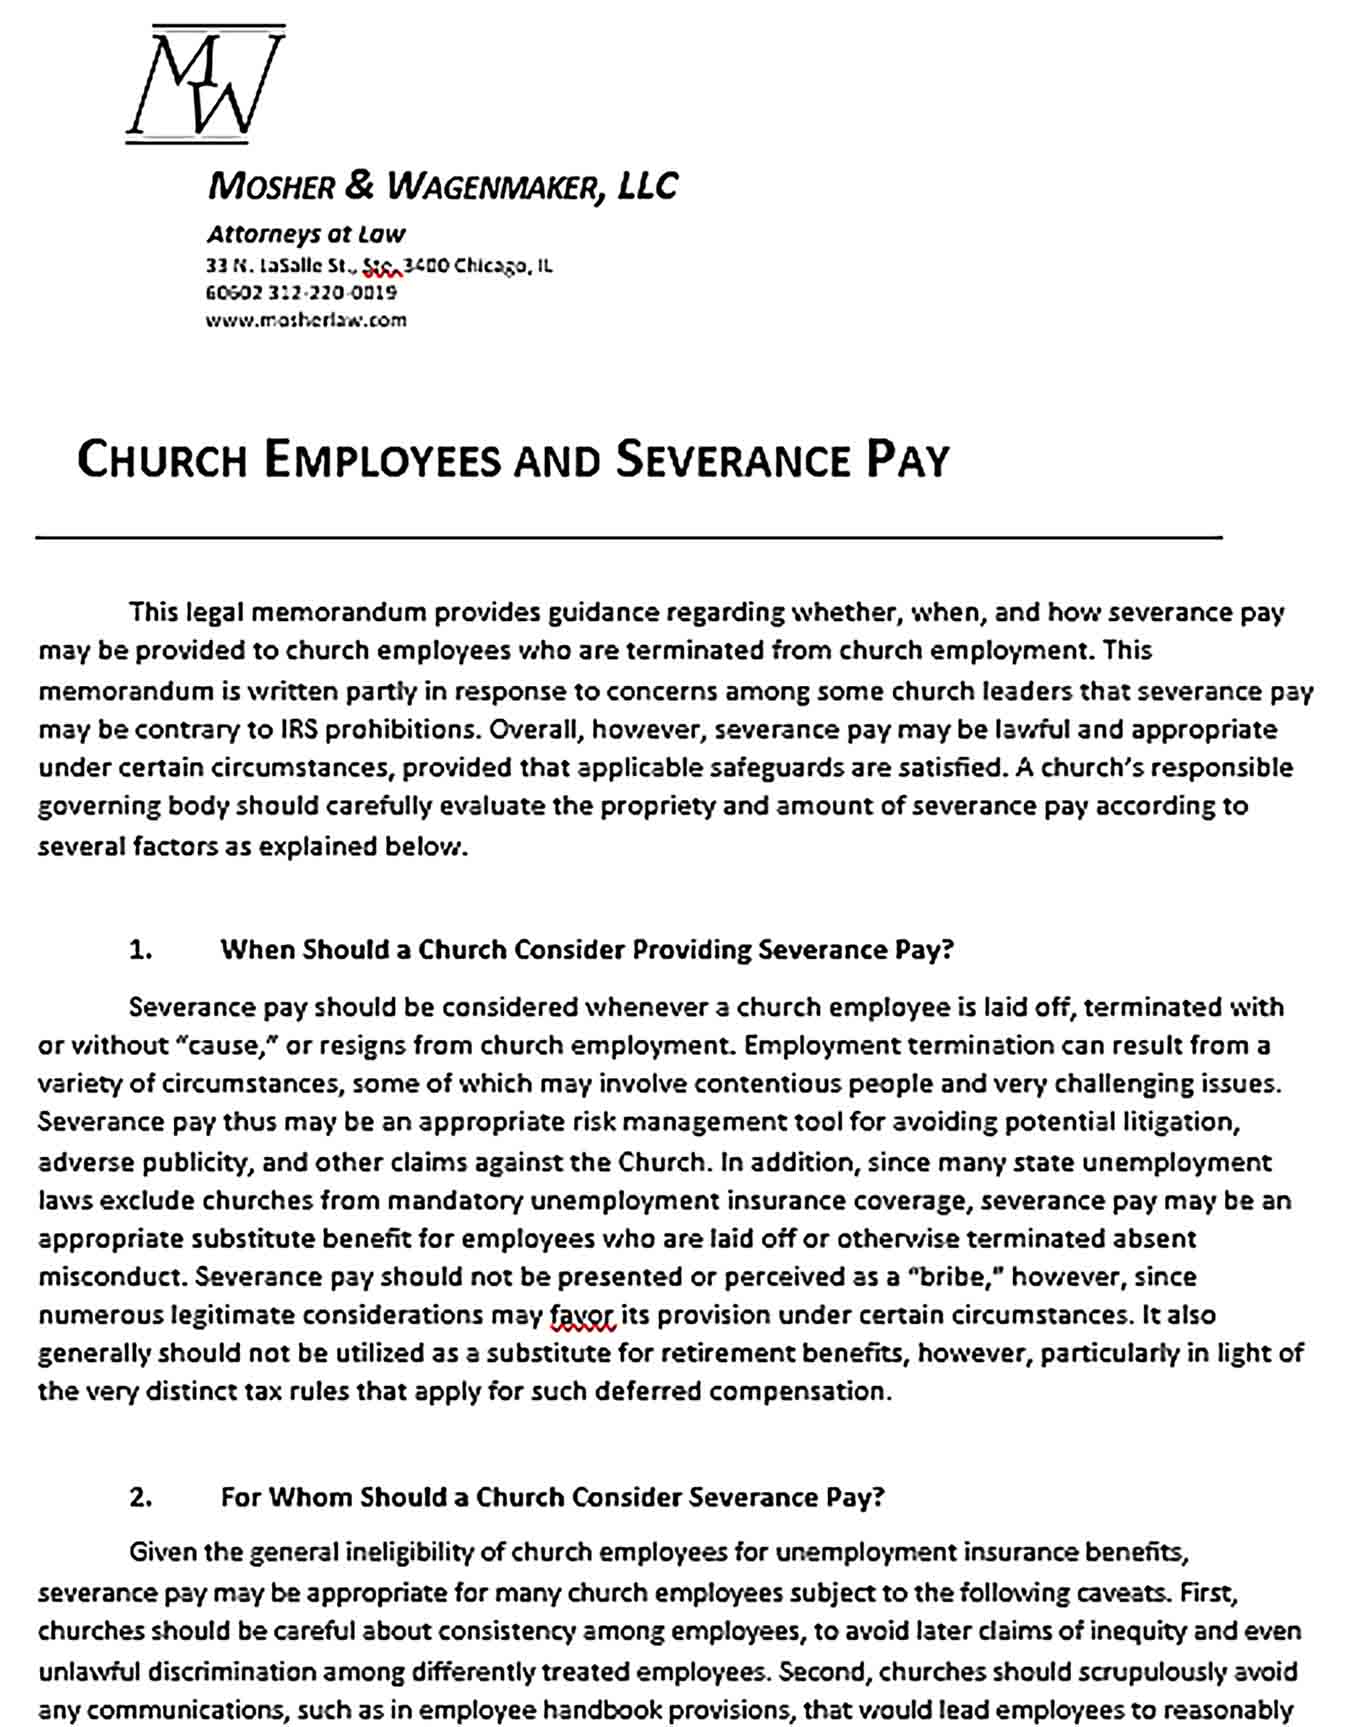 Sample Church Confidentiality Agreement Employees and Severance Pay